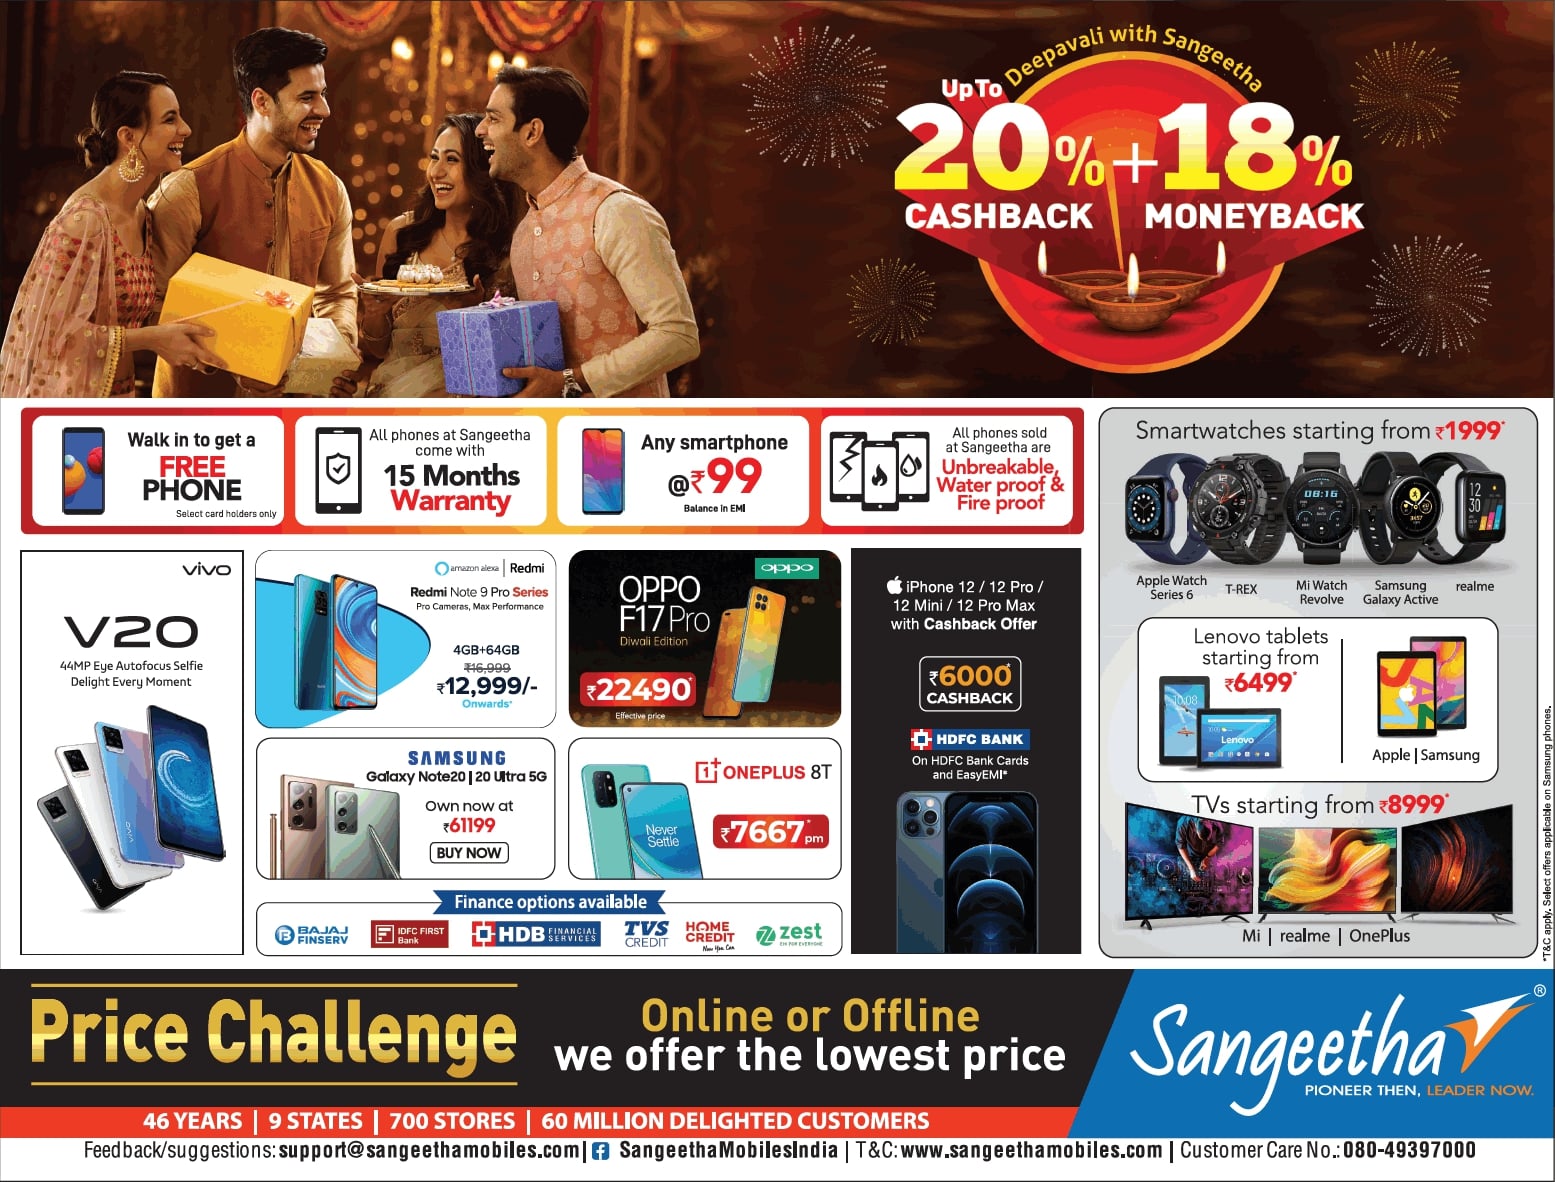 sangeetha-mobiles-price-challenge-online-or-offline-we-offer-the-lowest-price-ad-toi-bangalore-13-11-2020